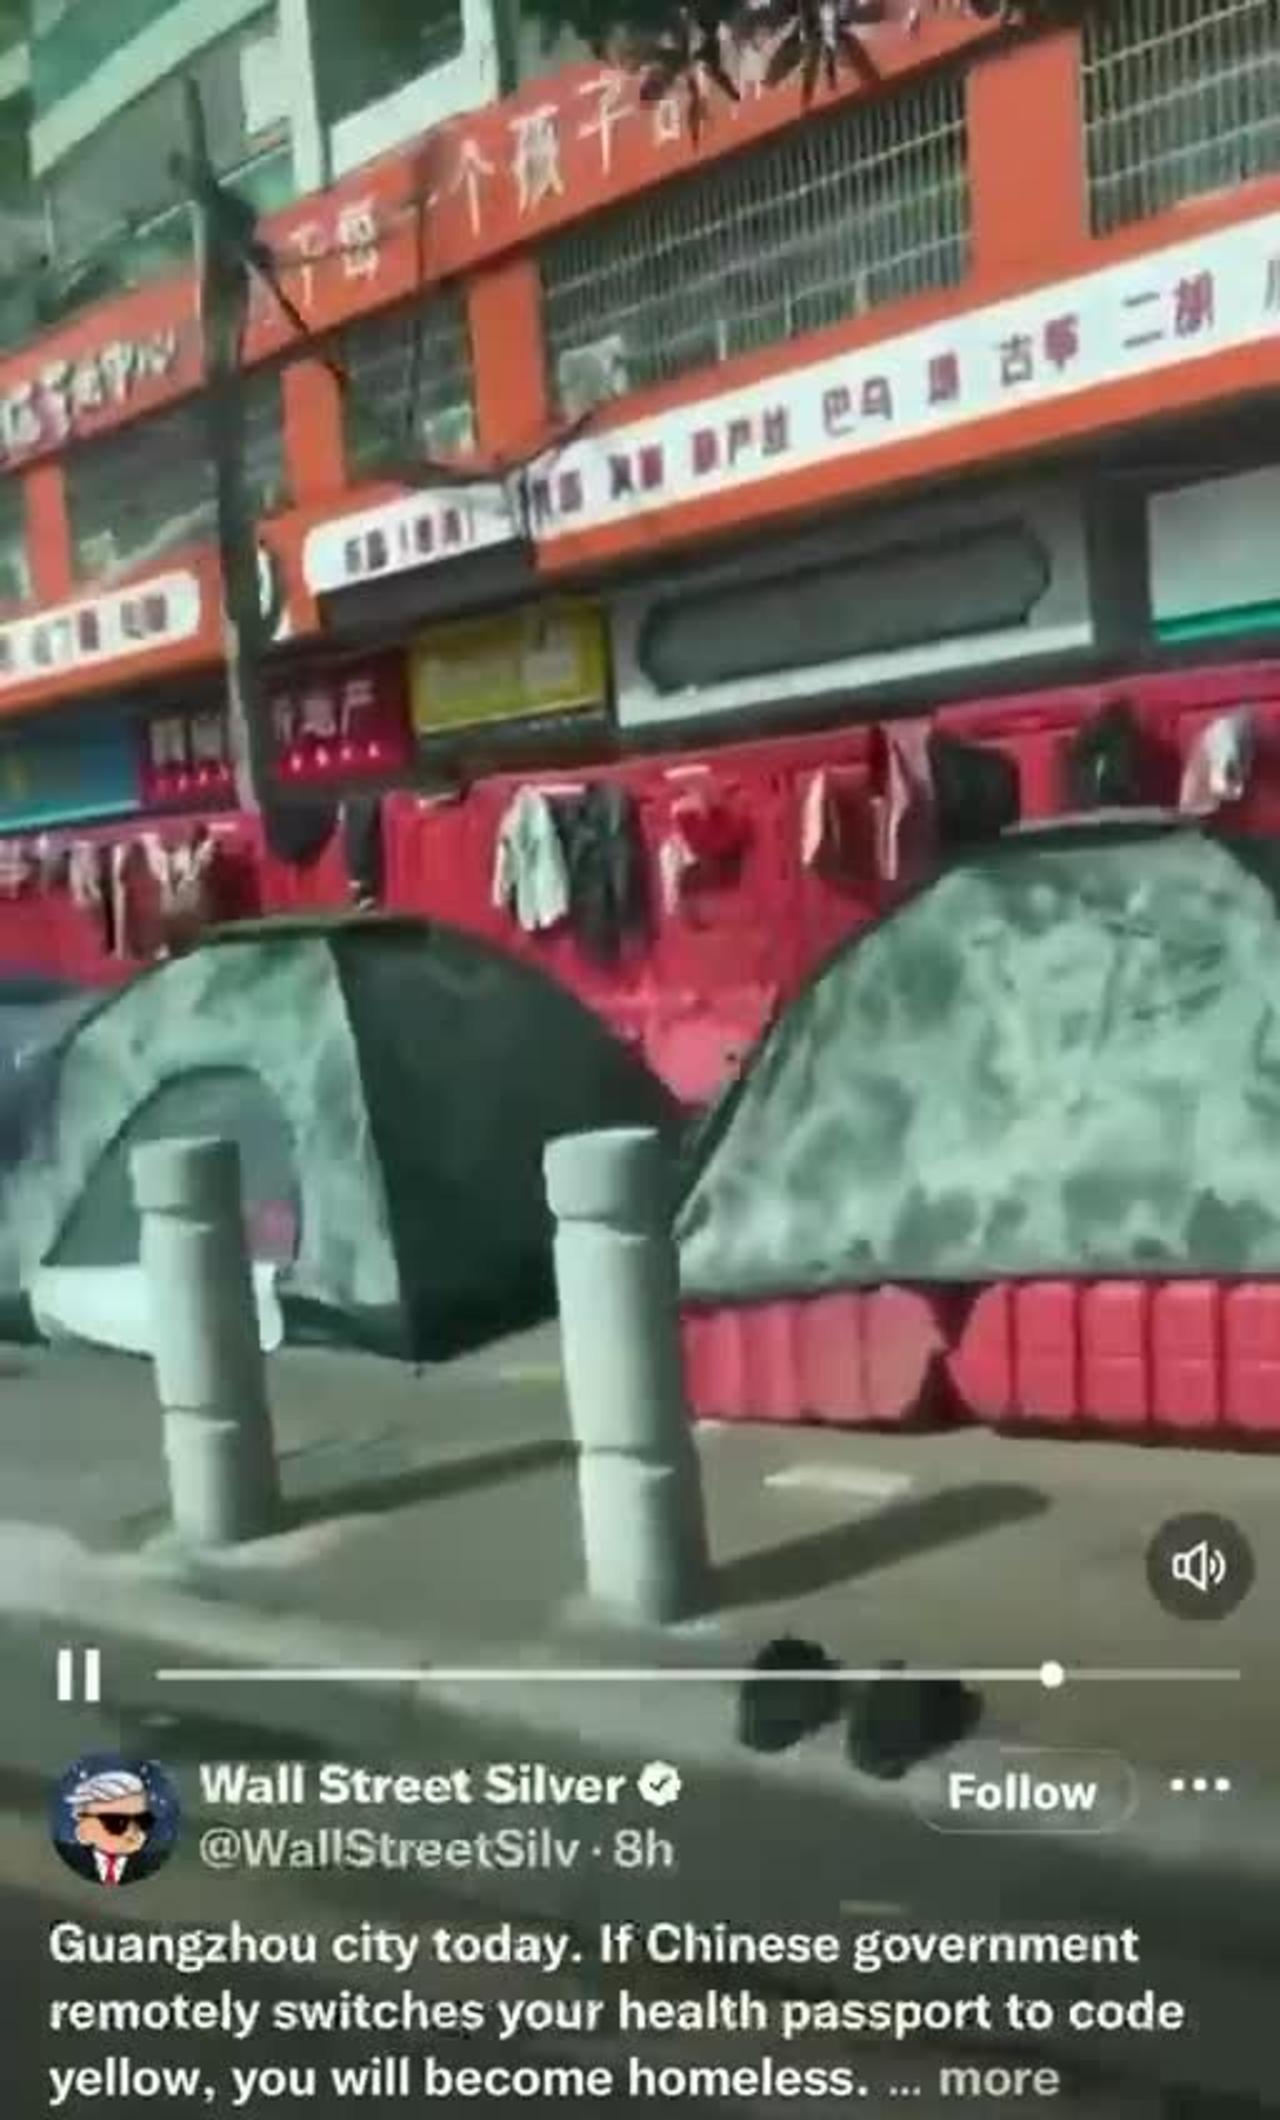 Meanwhile in China.... (could be NYC?)